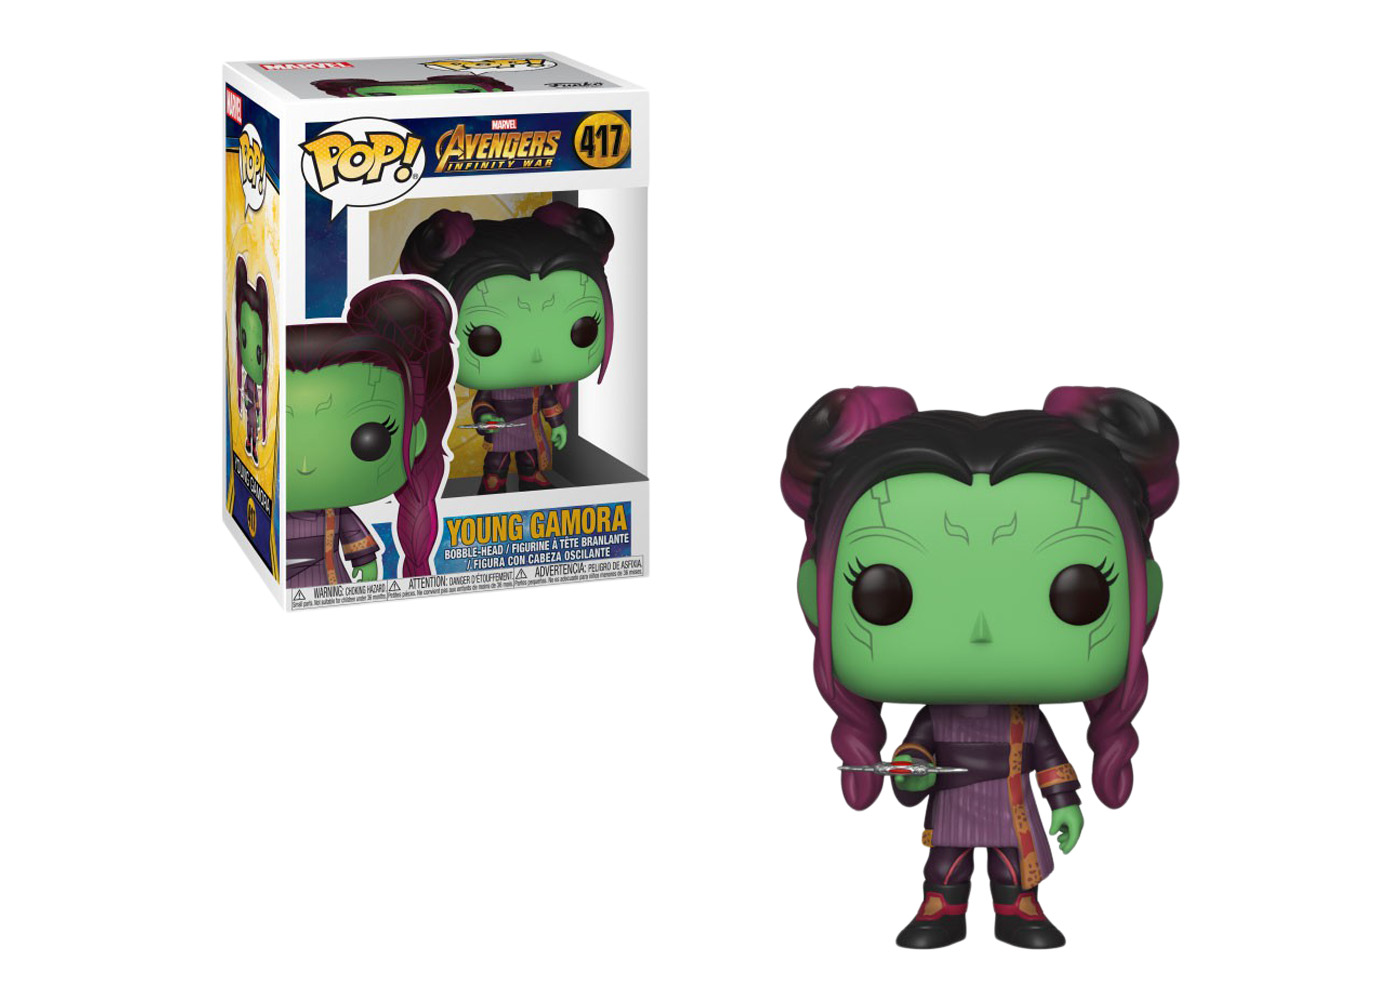 Funko Pop! Marvel Avengers Infinity War Young Gamora with Dagger